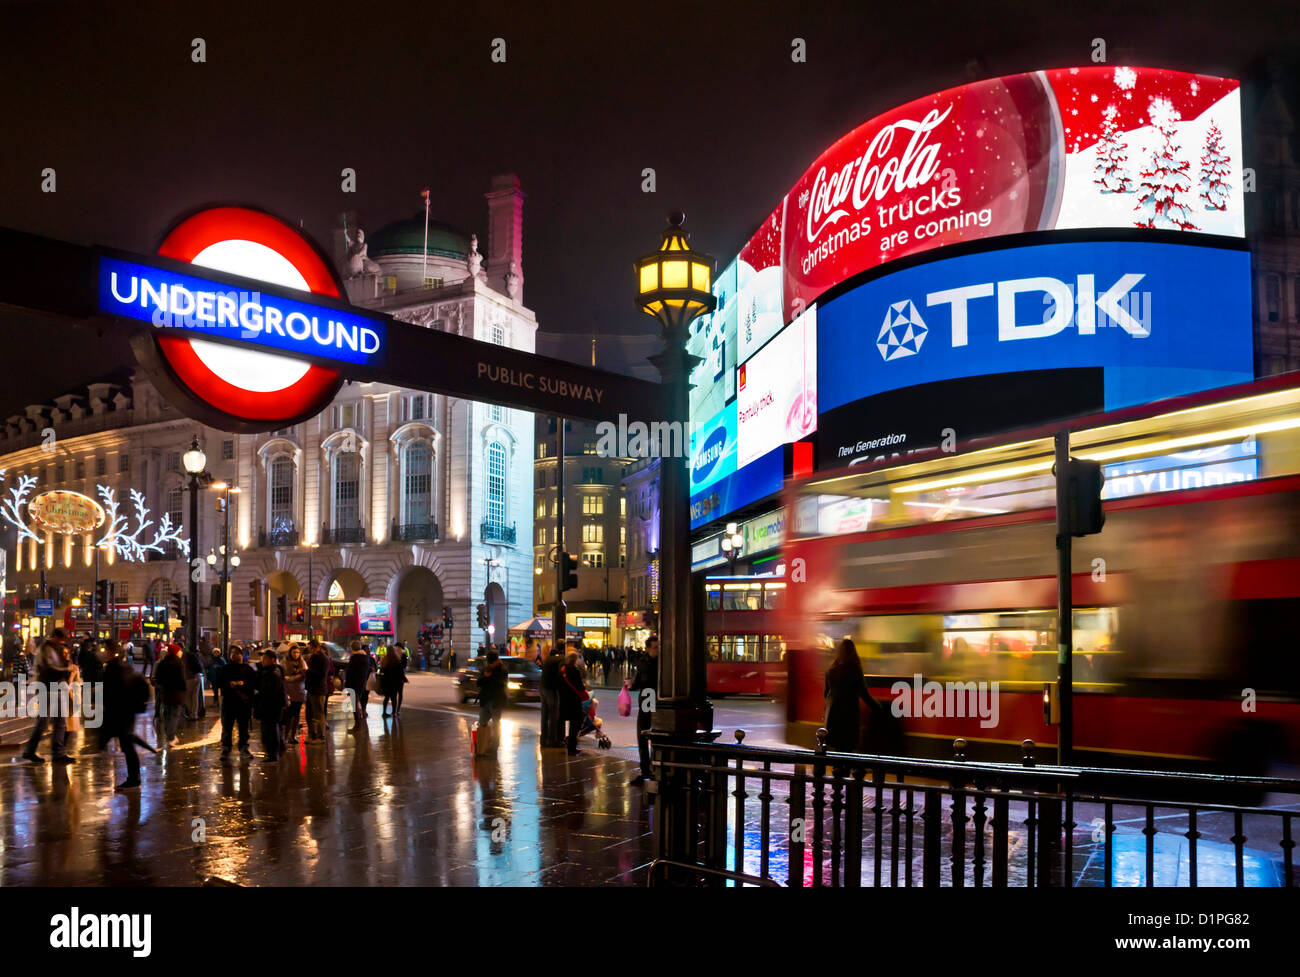 Busy People and a blurred Red London bus on a Busy night near Piccadilly Circus Underground Station Sign Central London England GB UK Europe Stock Photo